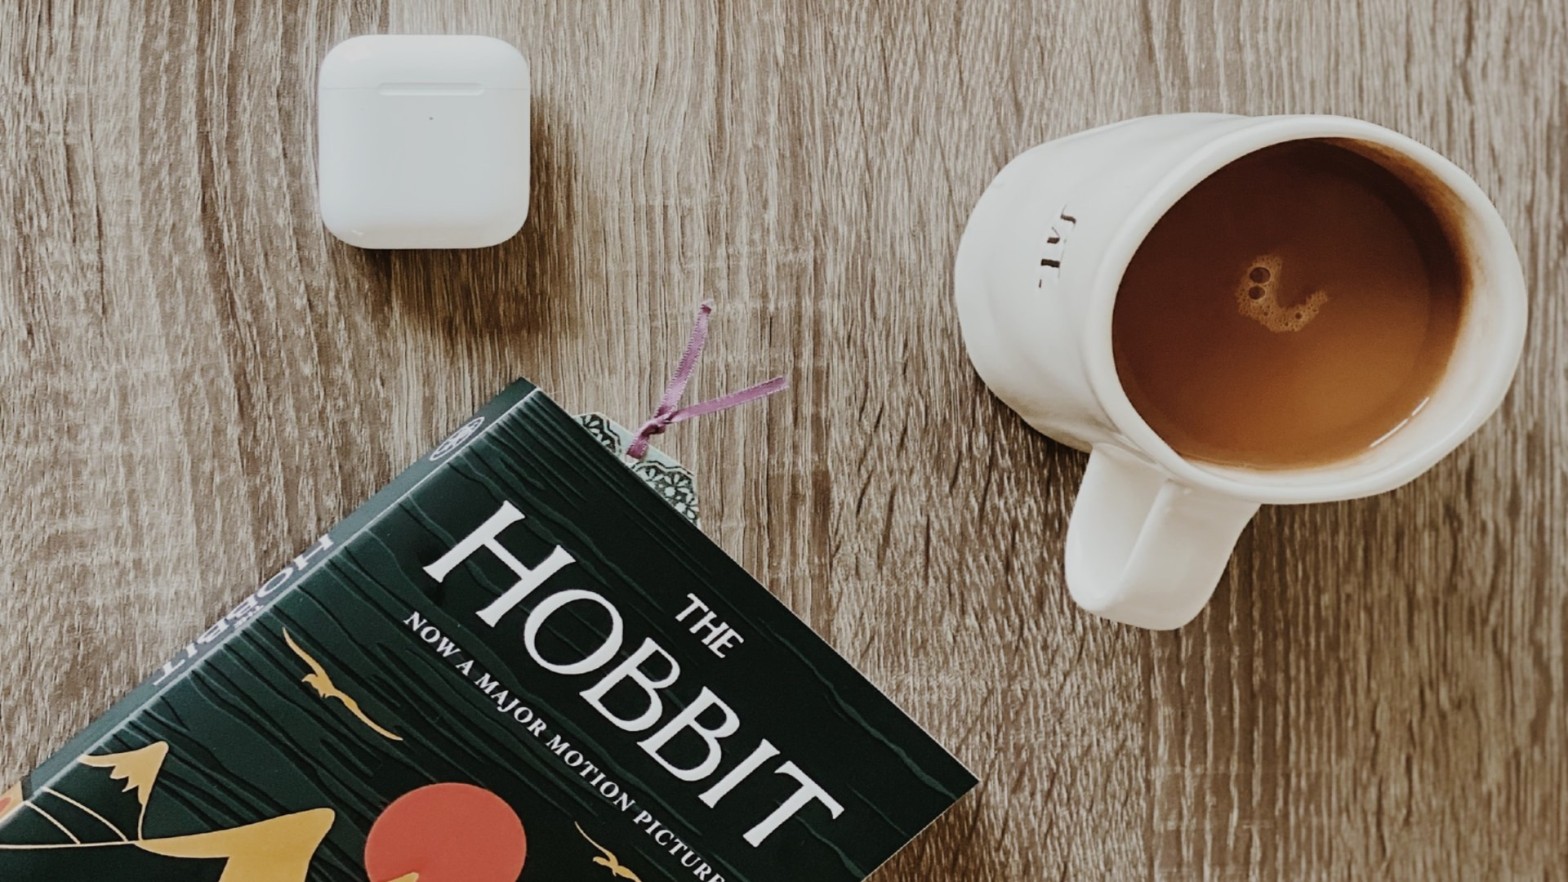 A book, cup of coffee, and airpods